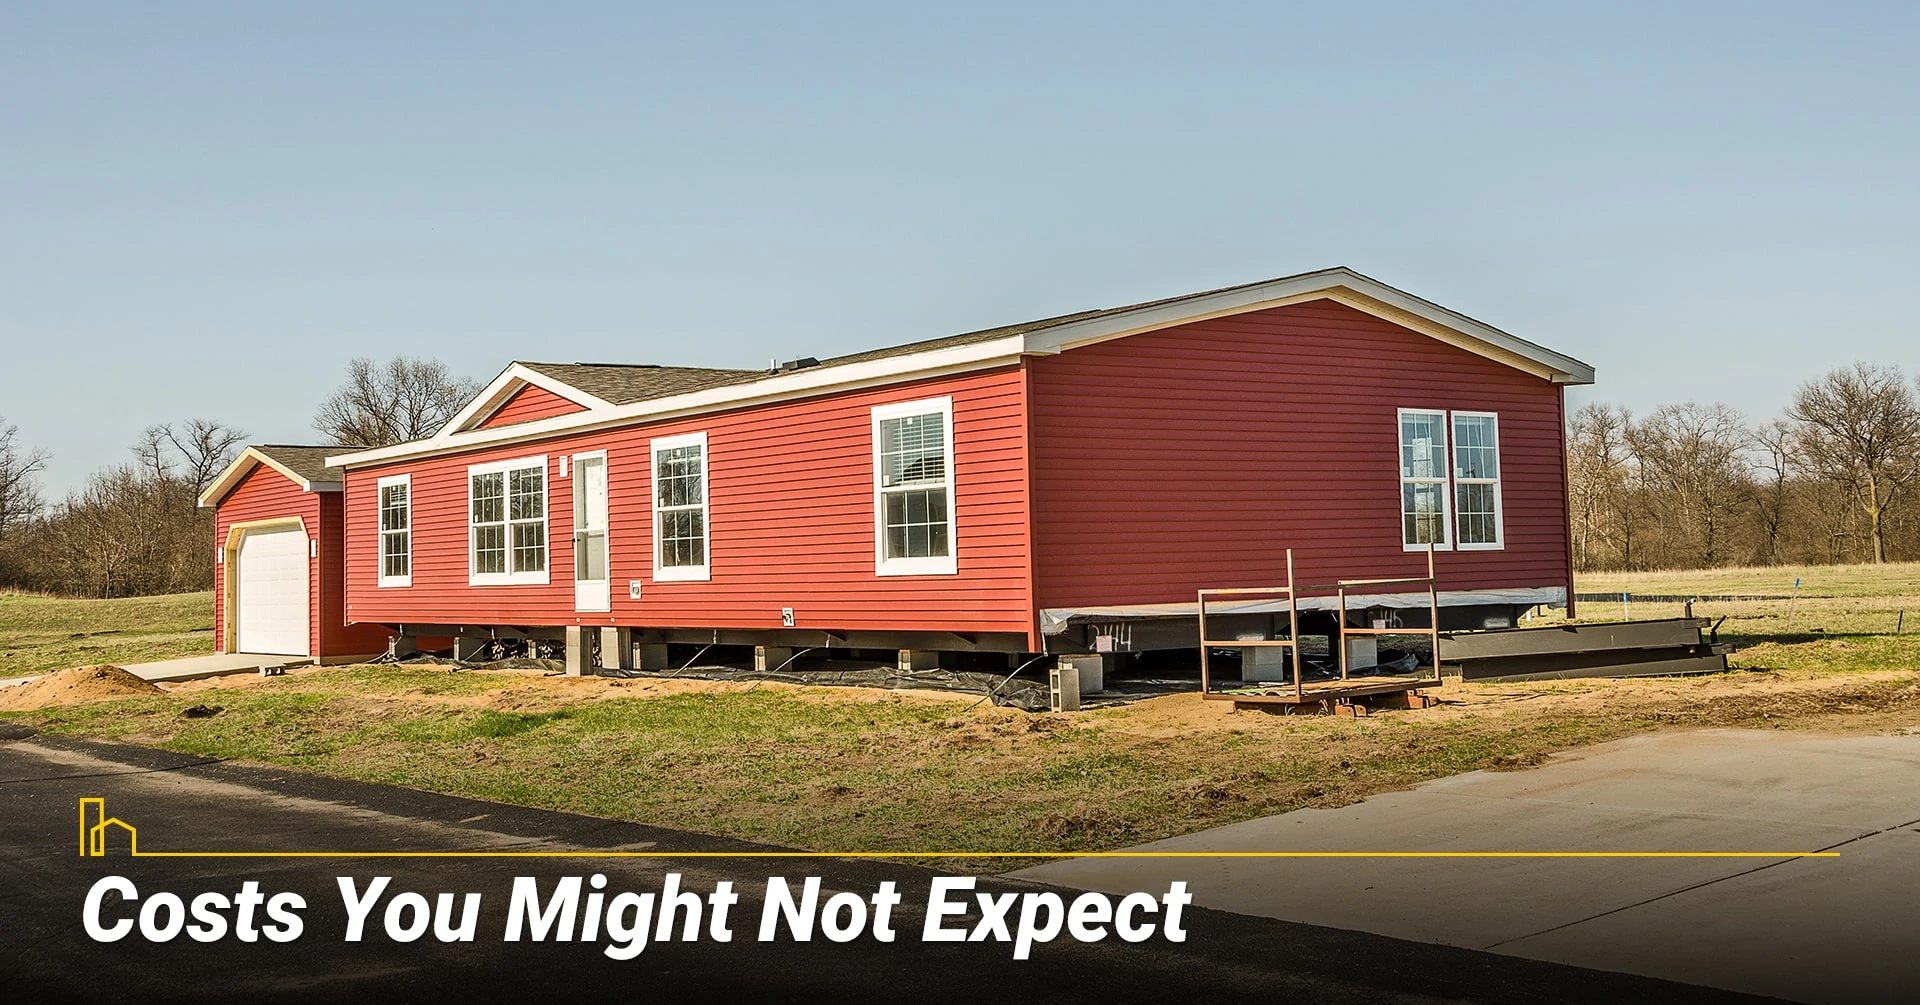 Costs You Might Not Expect, unexpected costs associated with manufactured homes